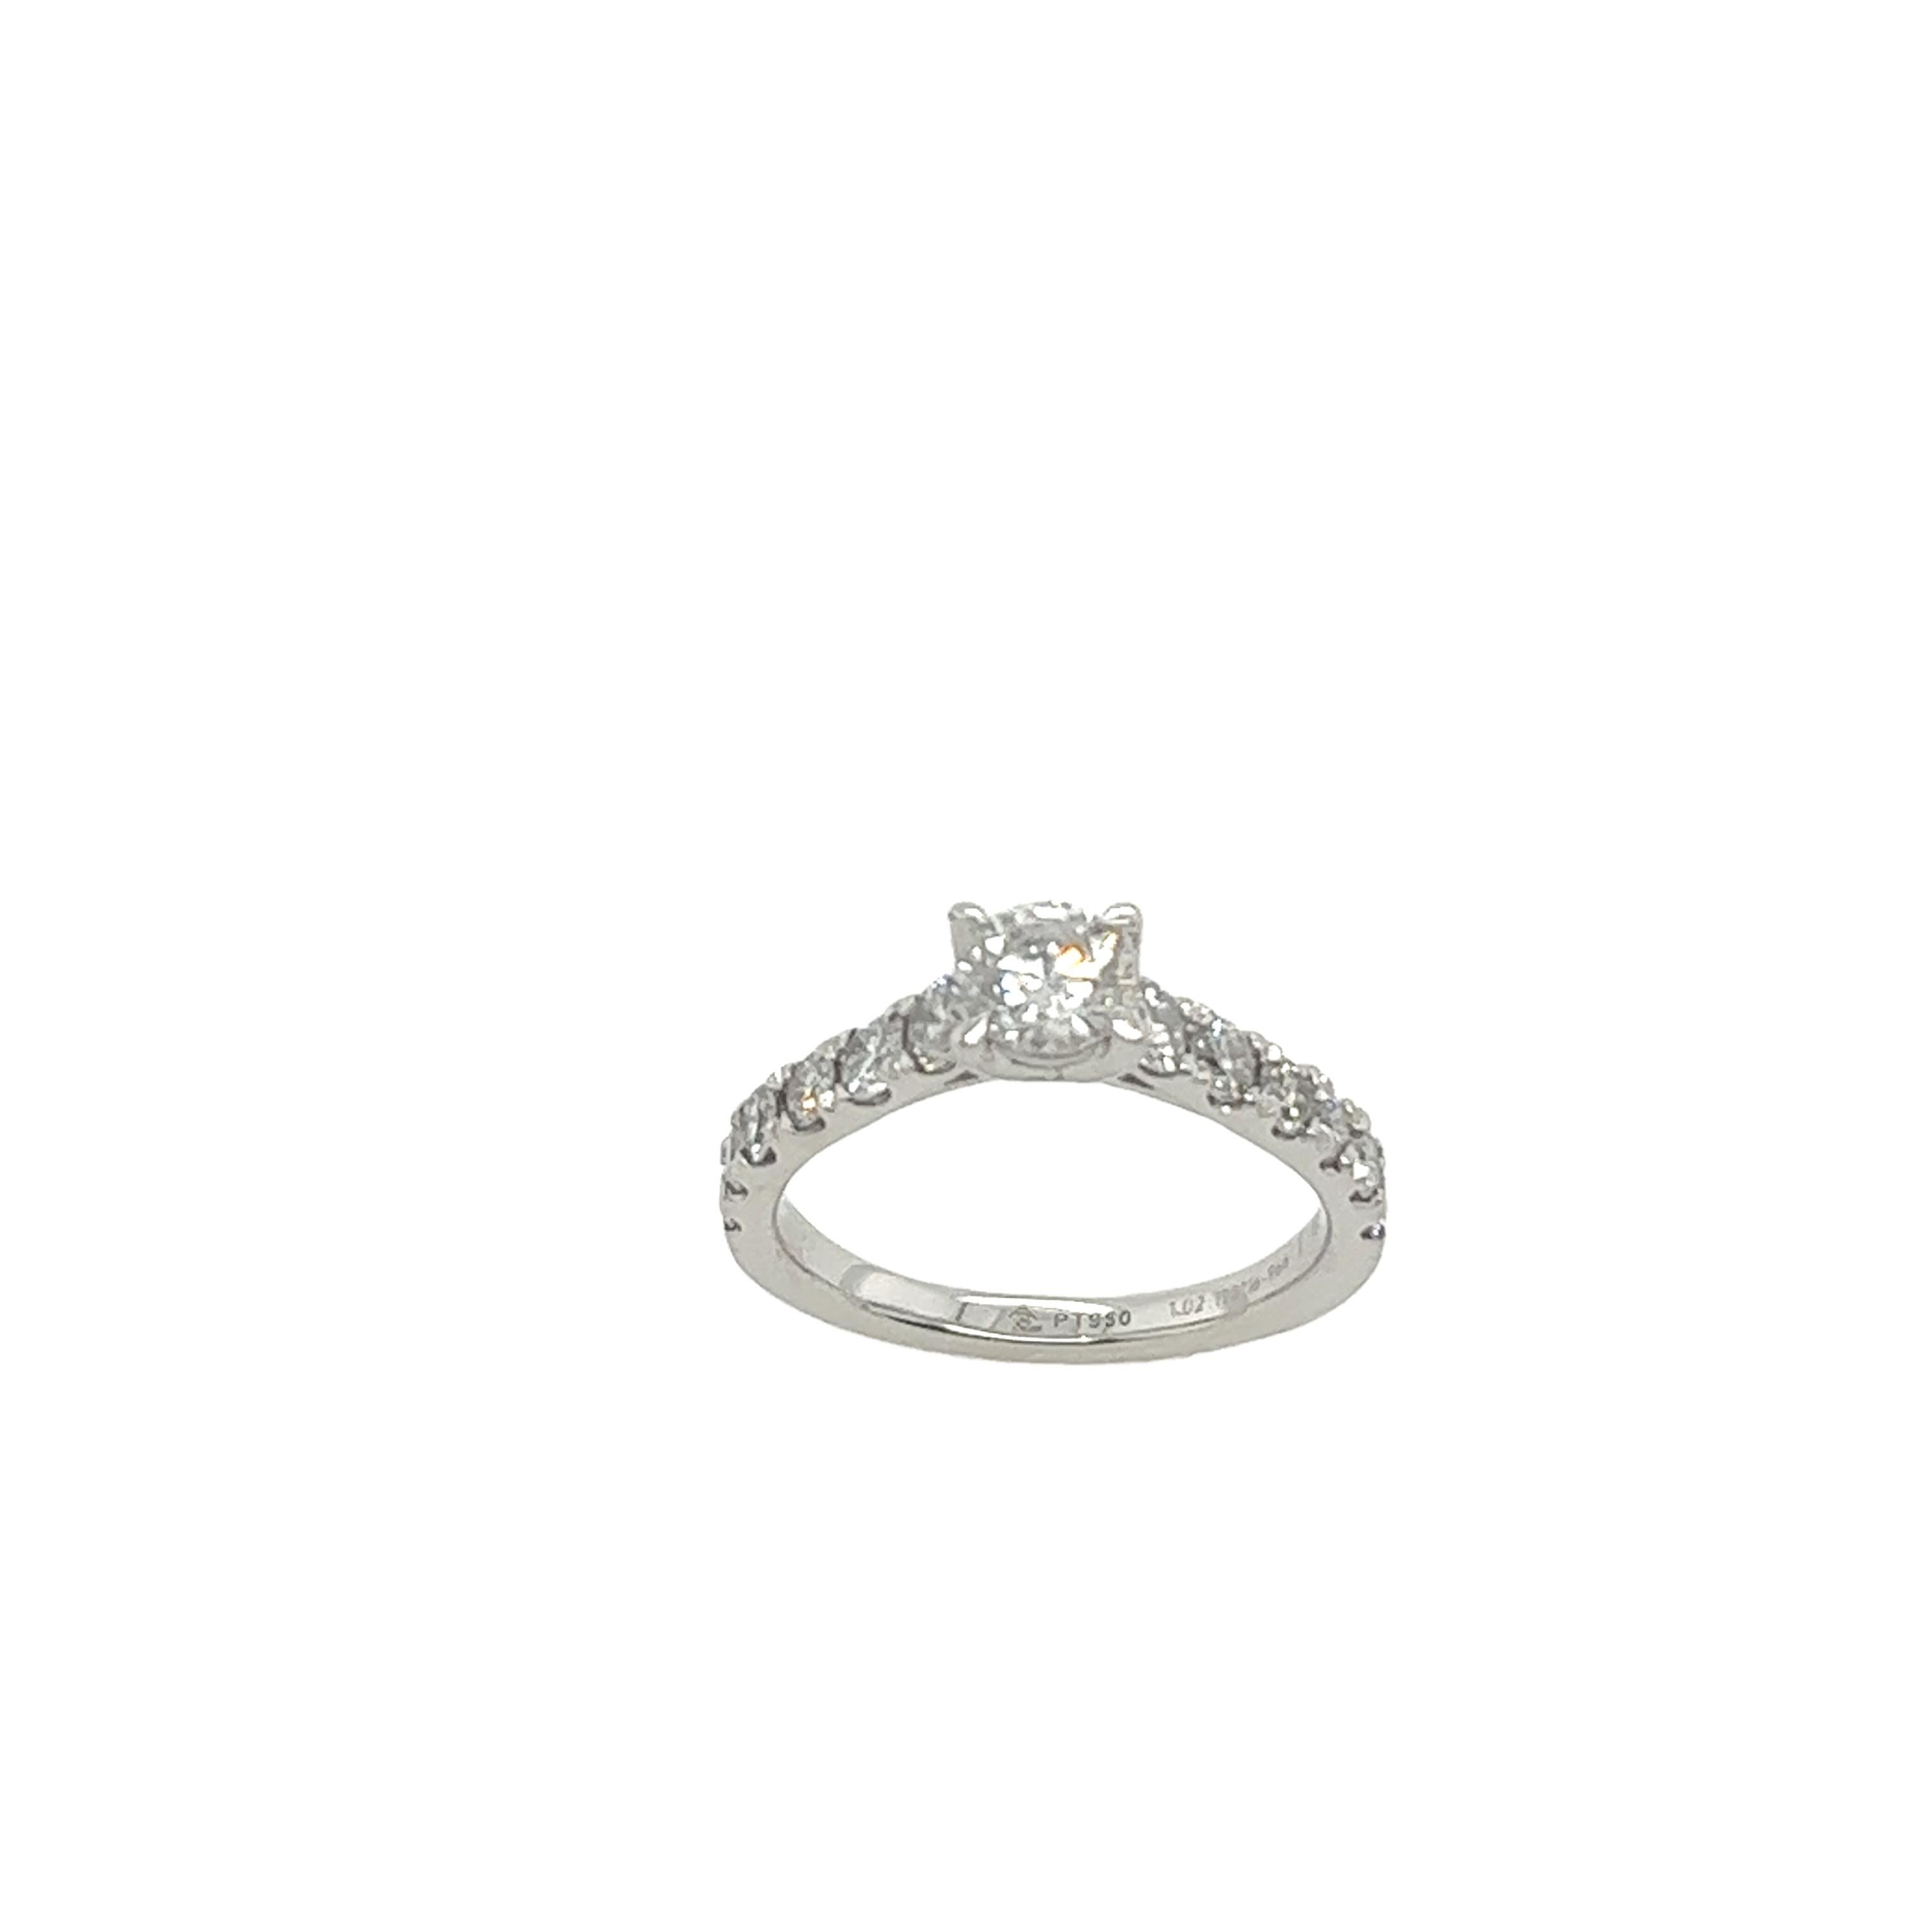 This engagement ring radiates brilliance and charm. Platinum masterpiece set with 0.40ct round brilliant cut diamond set with 12 small round brilliant cut diamonds, 0.62ct.
Total Diamond Weight: 0.40ct & 0.62ct
Diamond Colour: G
Diamond Clarity: